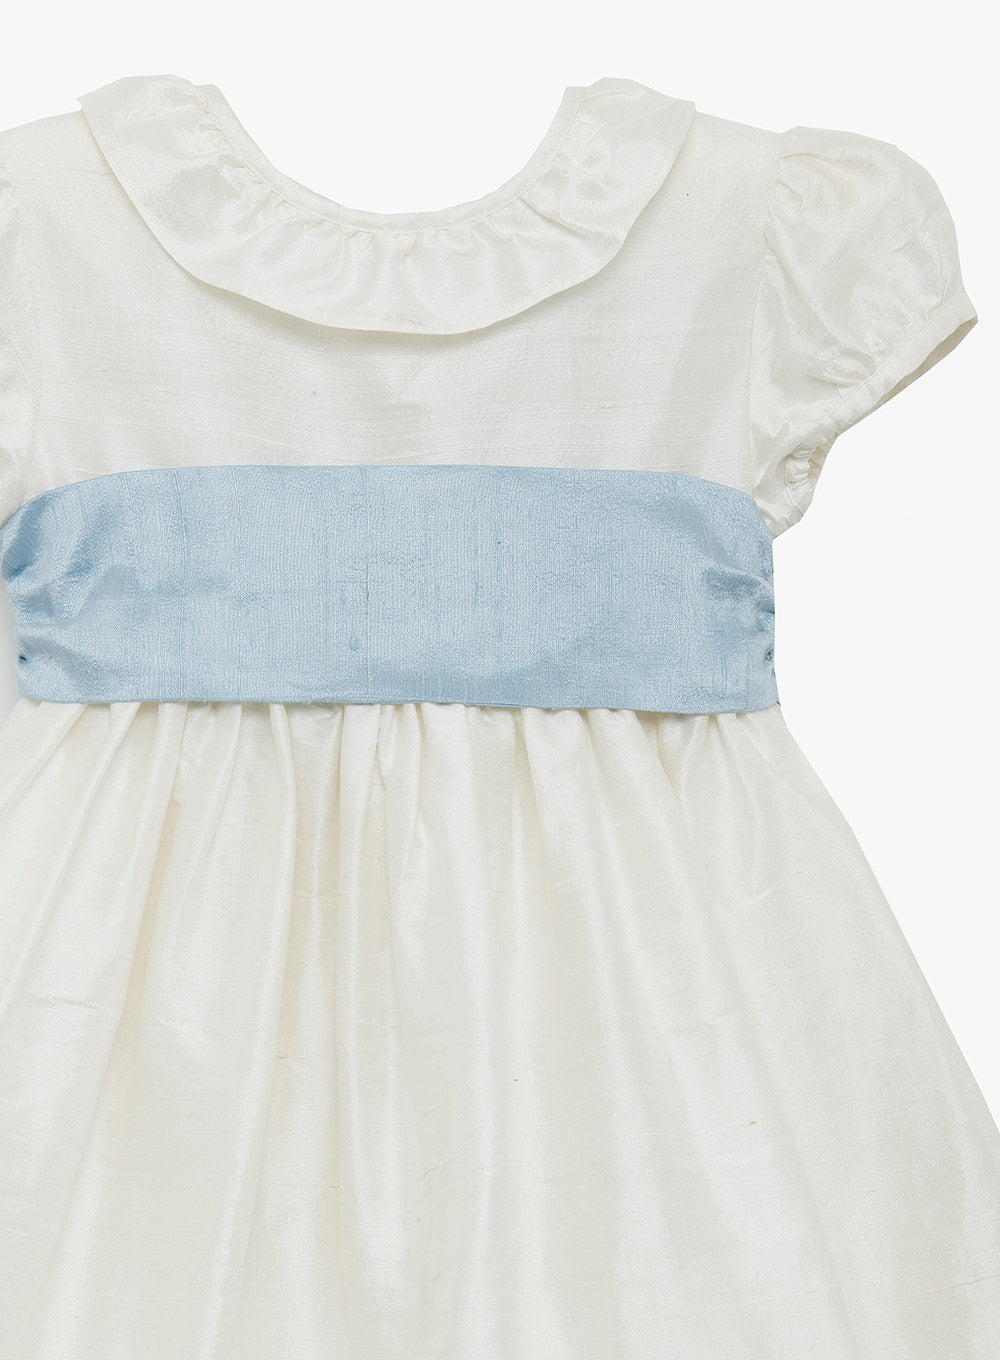 Victoria Dress in Ivory/Blue